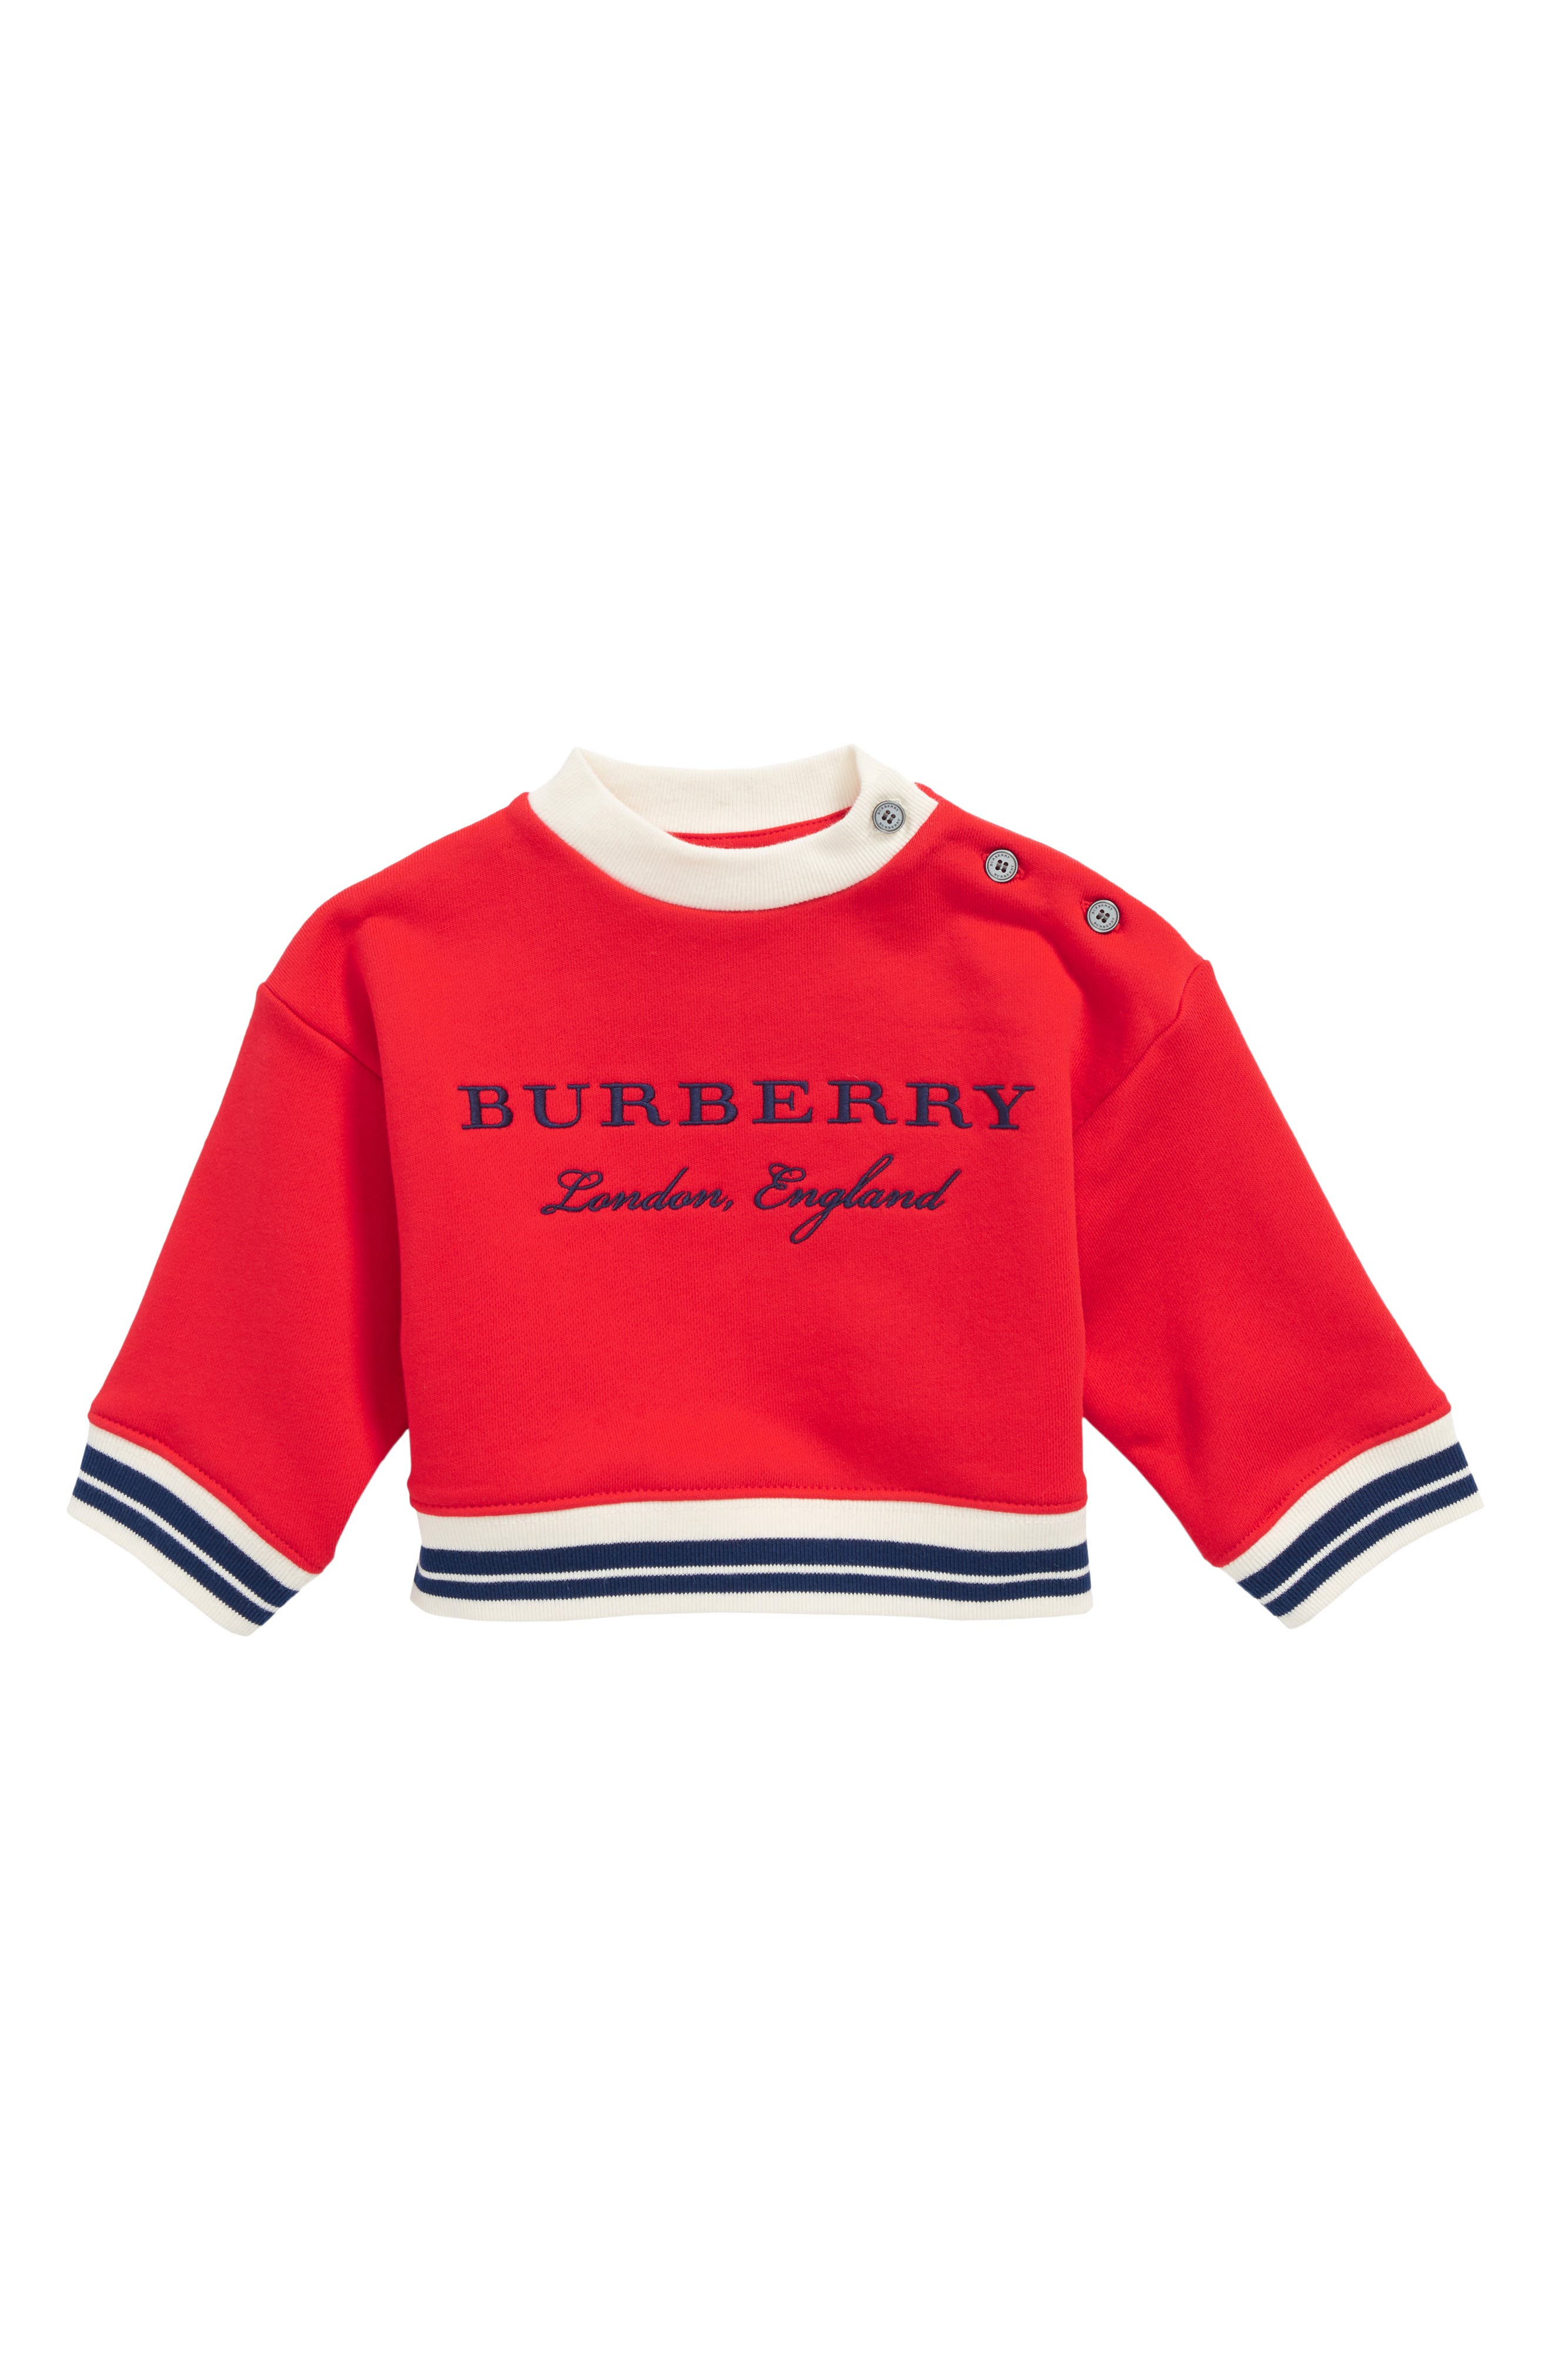 burberry gloves kids red